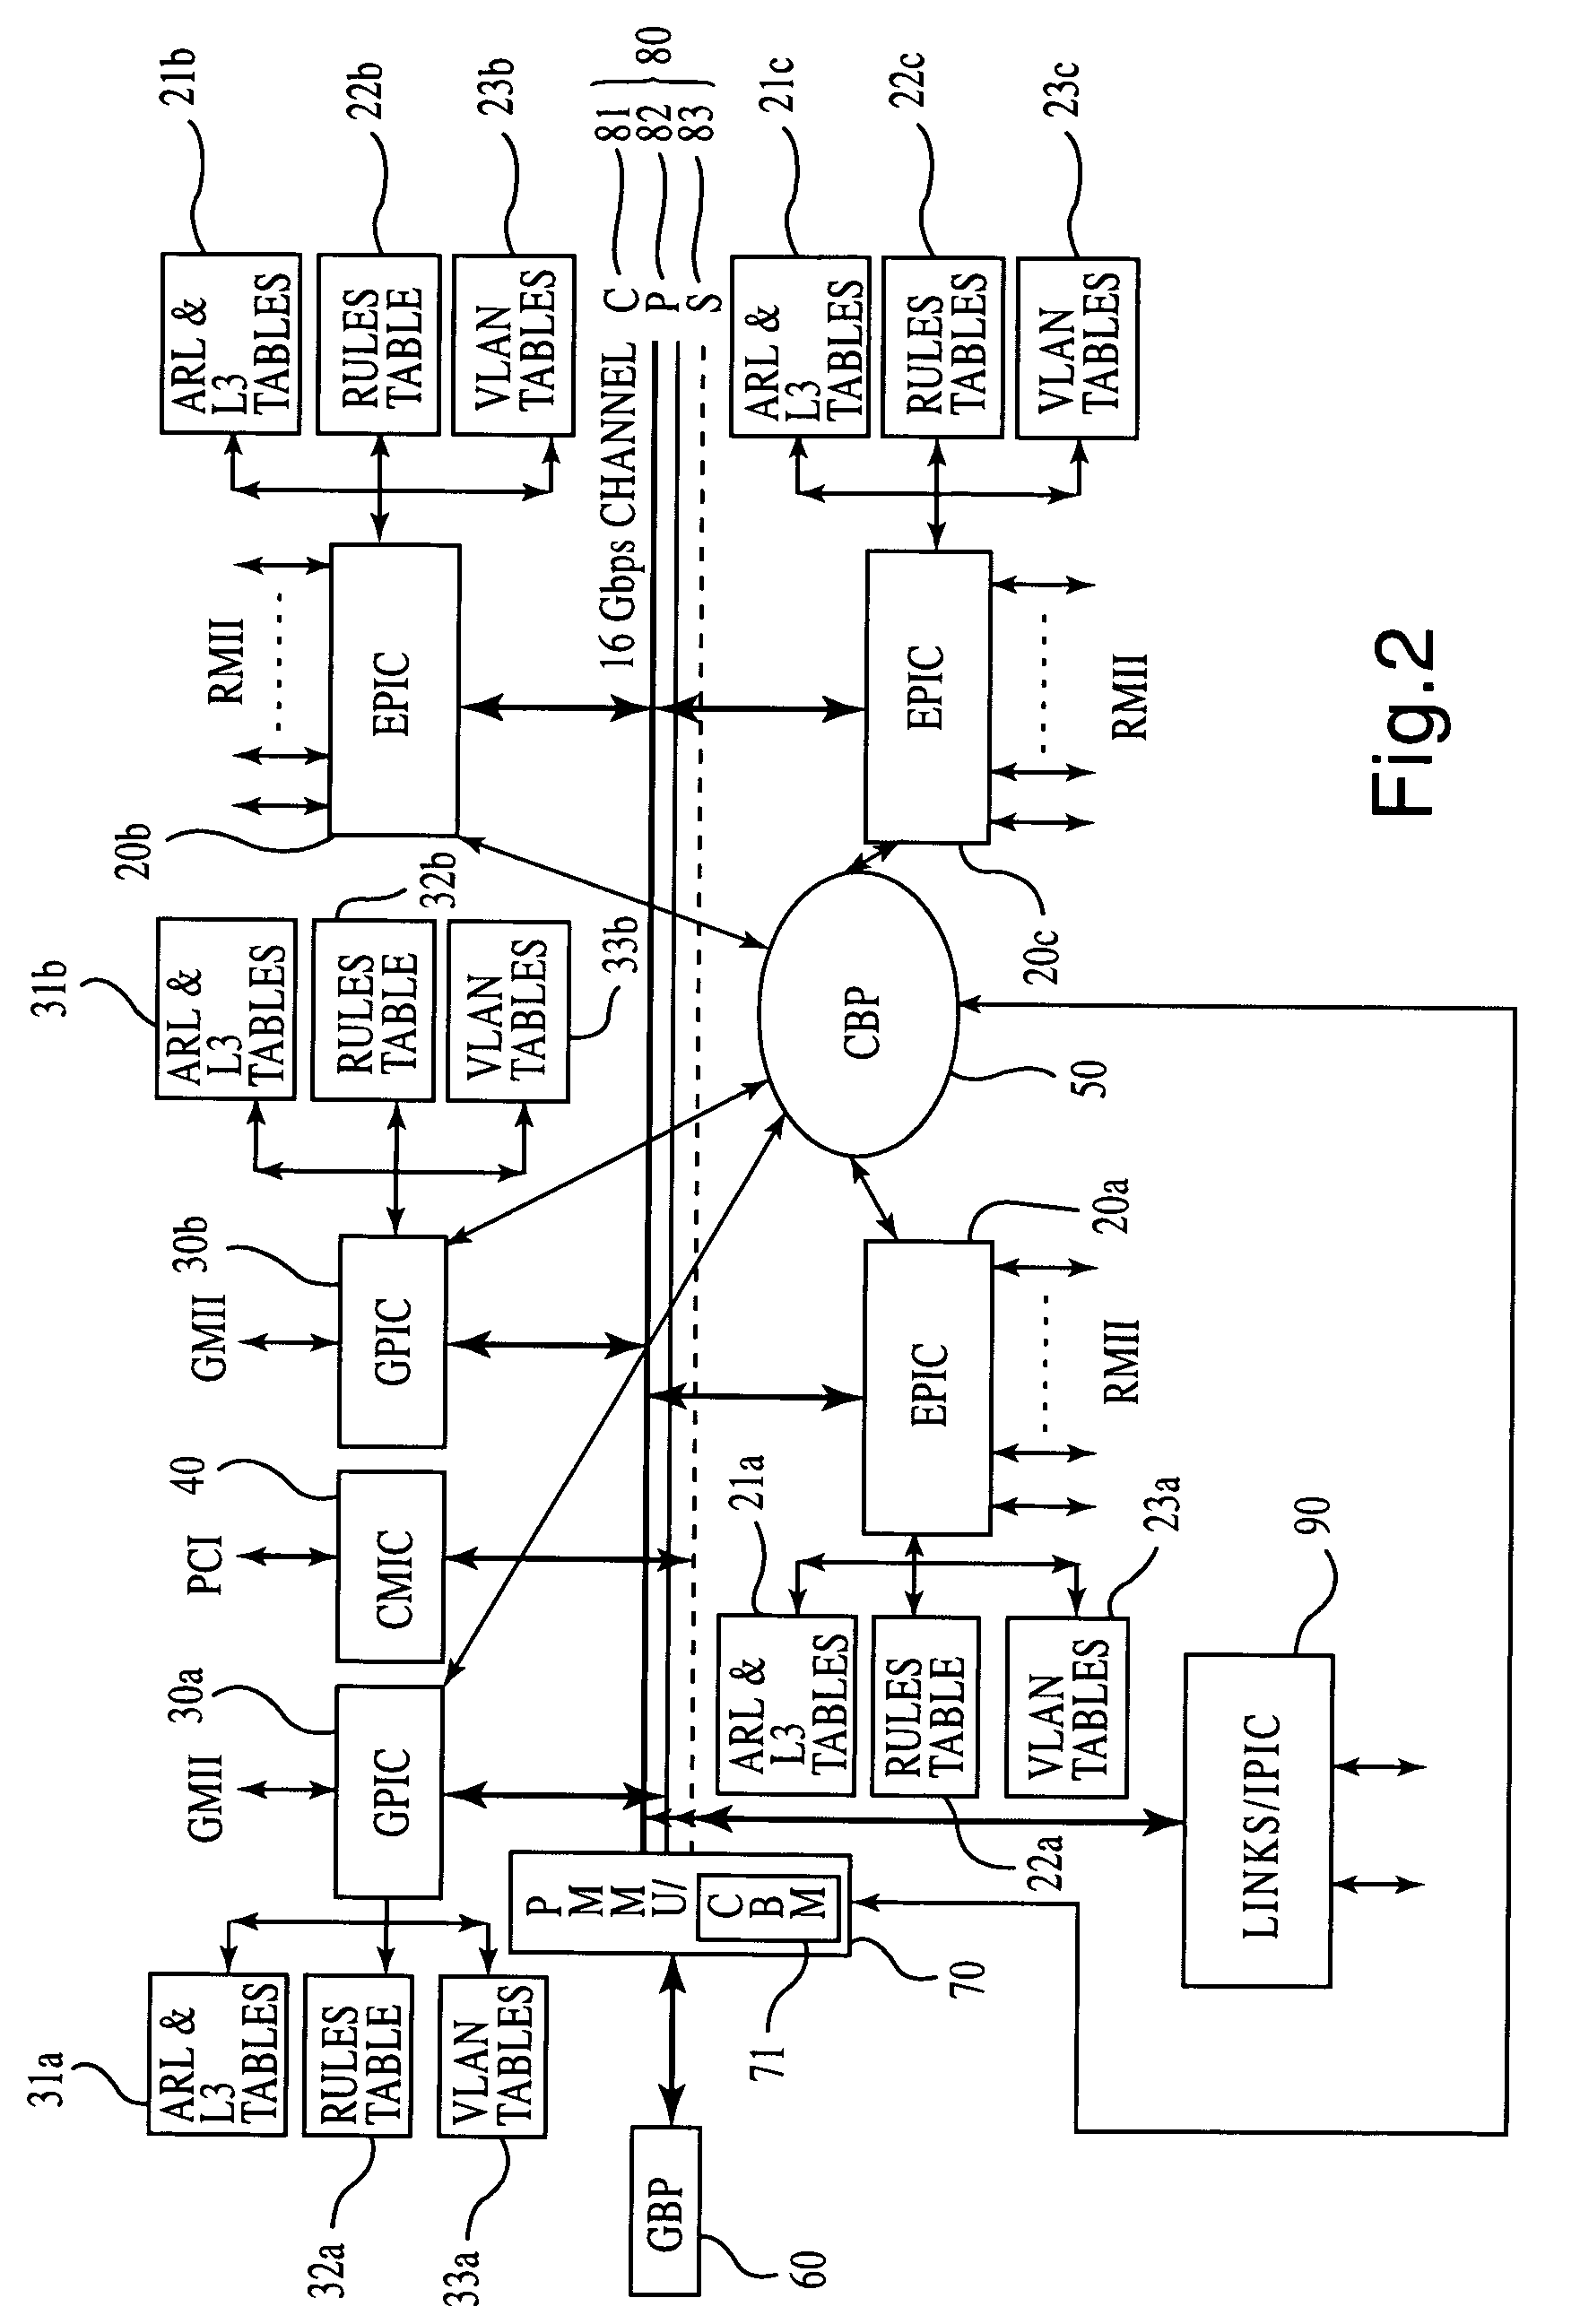 Apparatus and method for enabling voice over IP support for a network switch